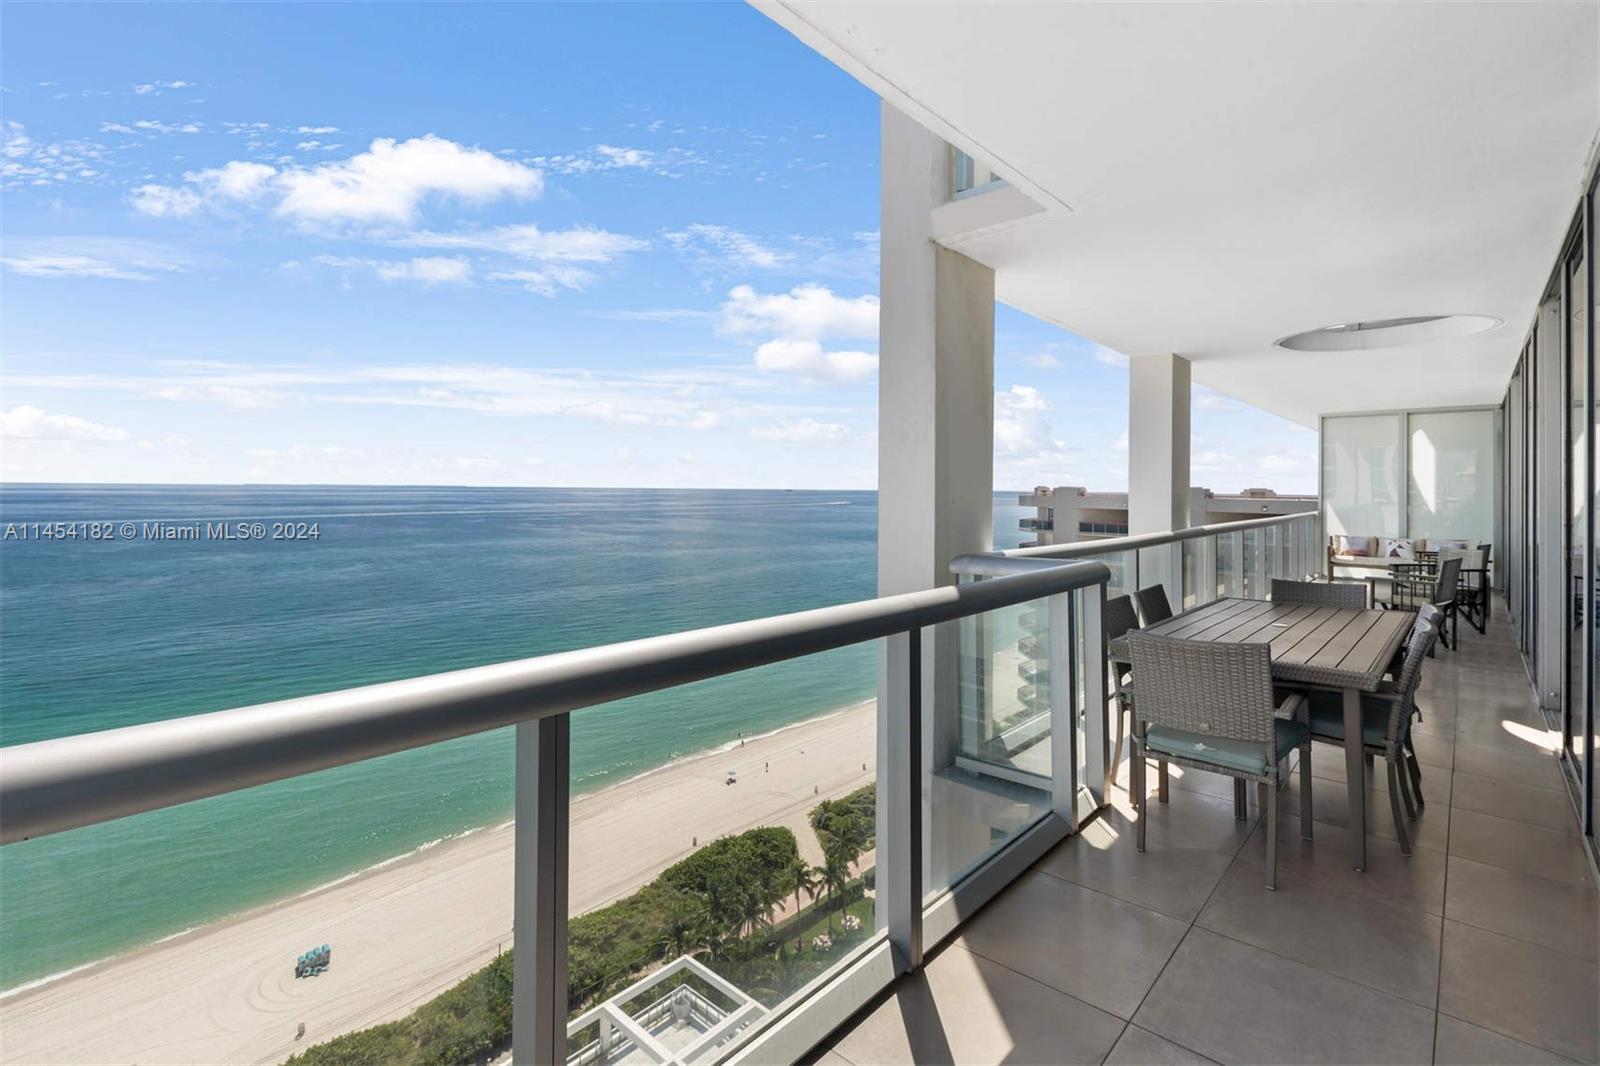 Listing Image 6799 Collins Ave #LPH2